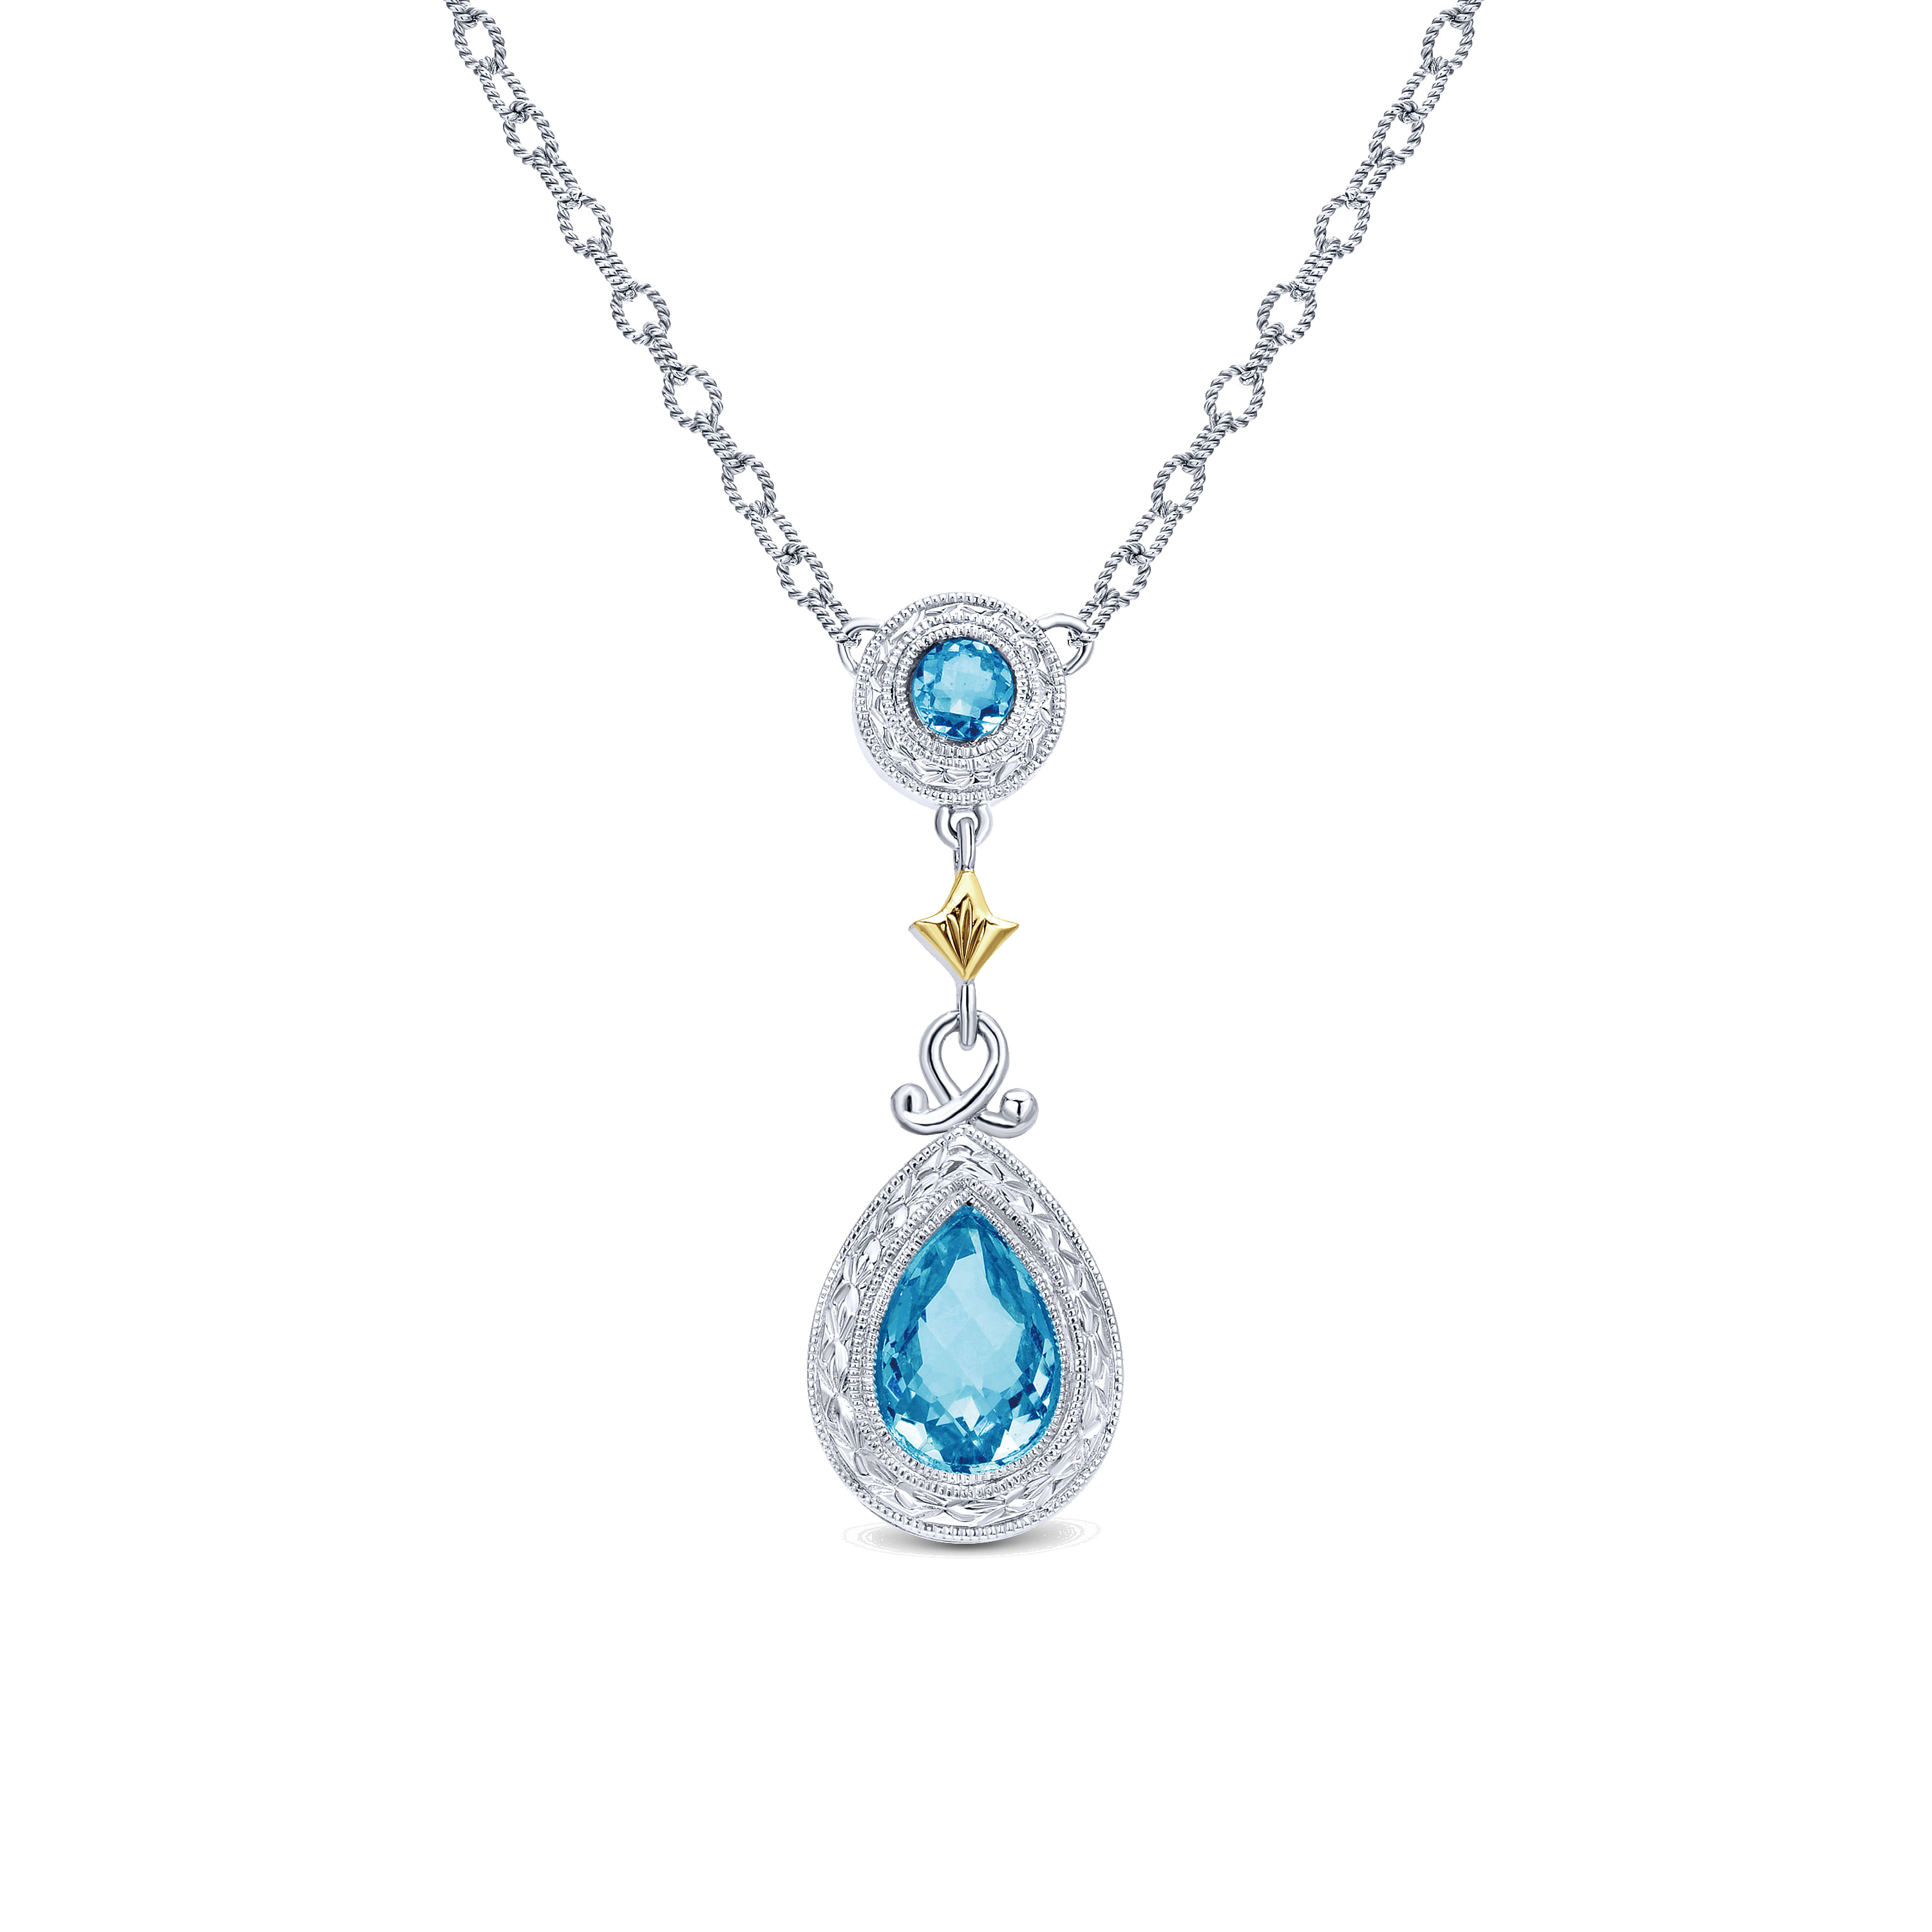 18 inch 925 Sterling Silver/18k Yellow Gold Vintage Inspired Swiss Blue Topaz Necklace